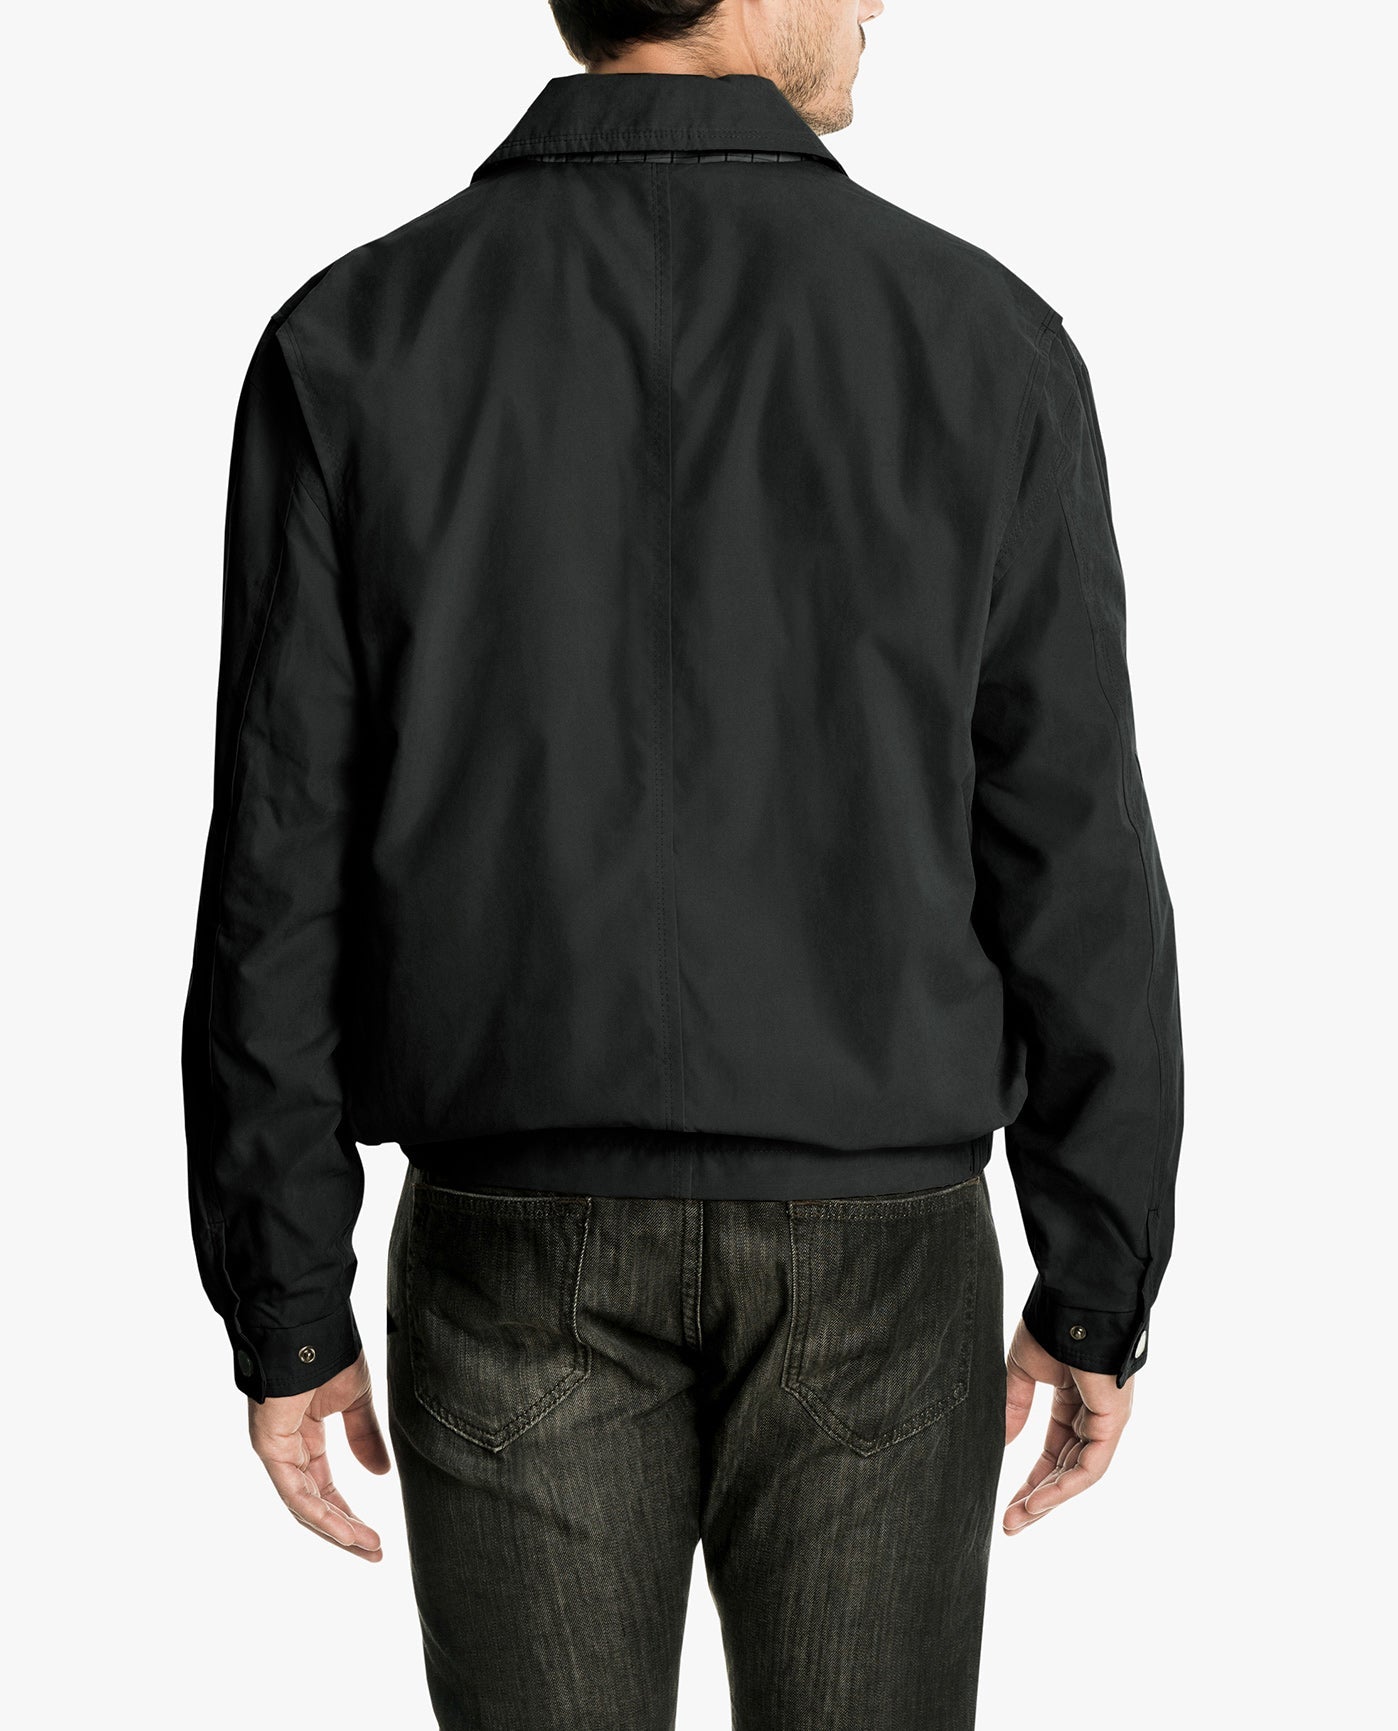 BACK VIEW OF TALL LIGHT WEIGHT ZIP FRONT GOLF JACKET | IRON